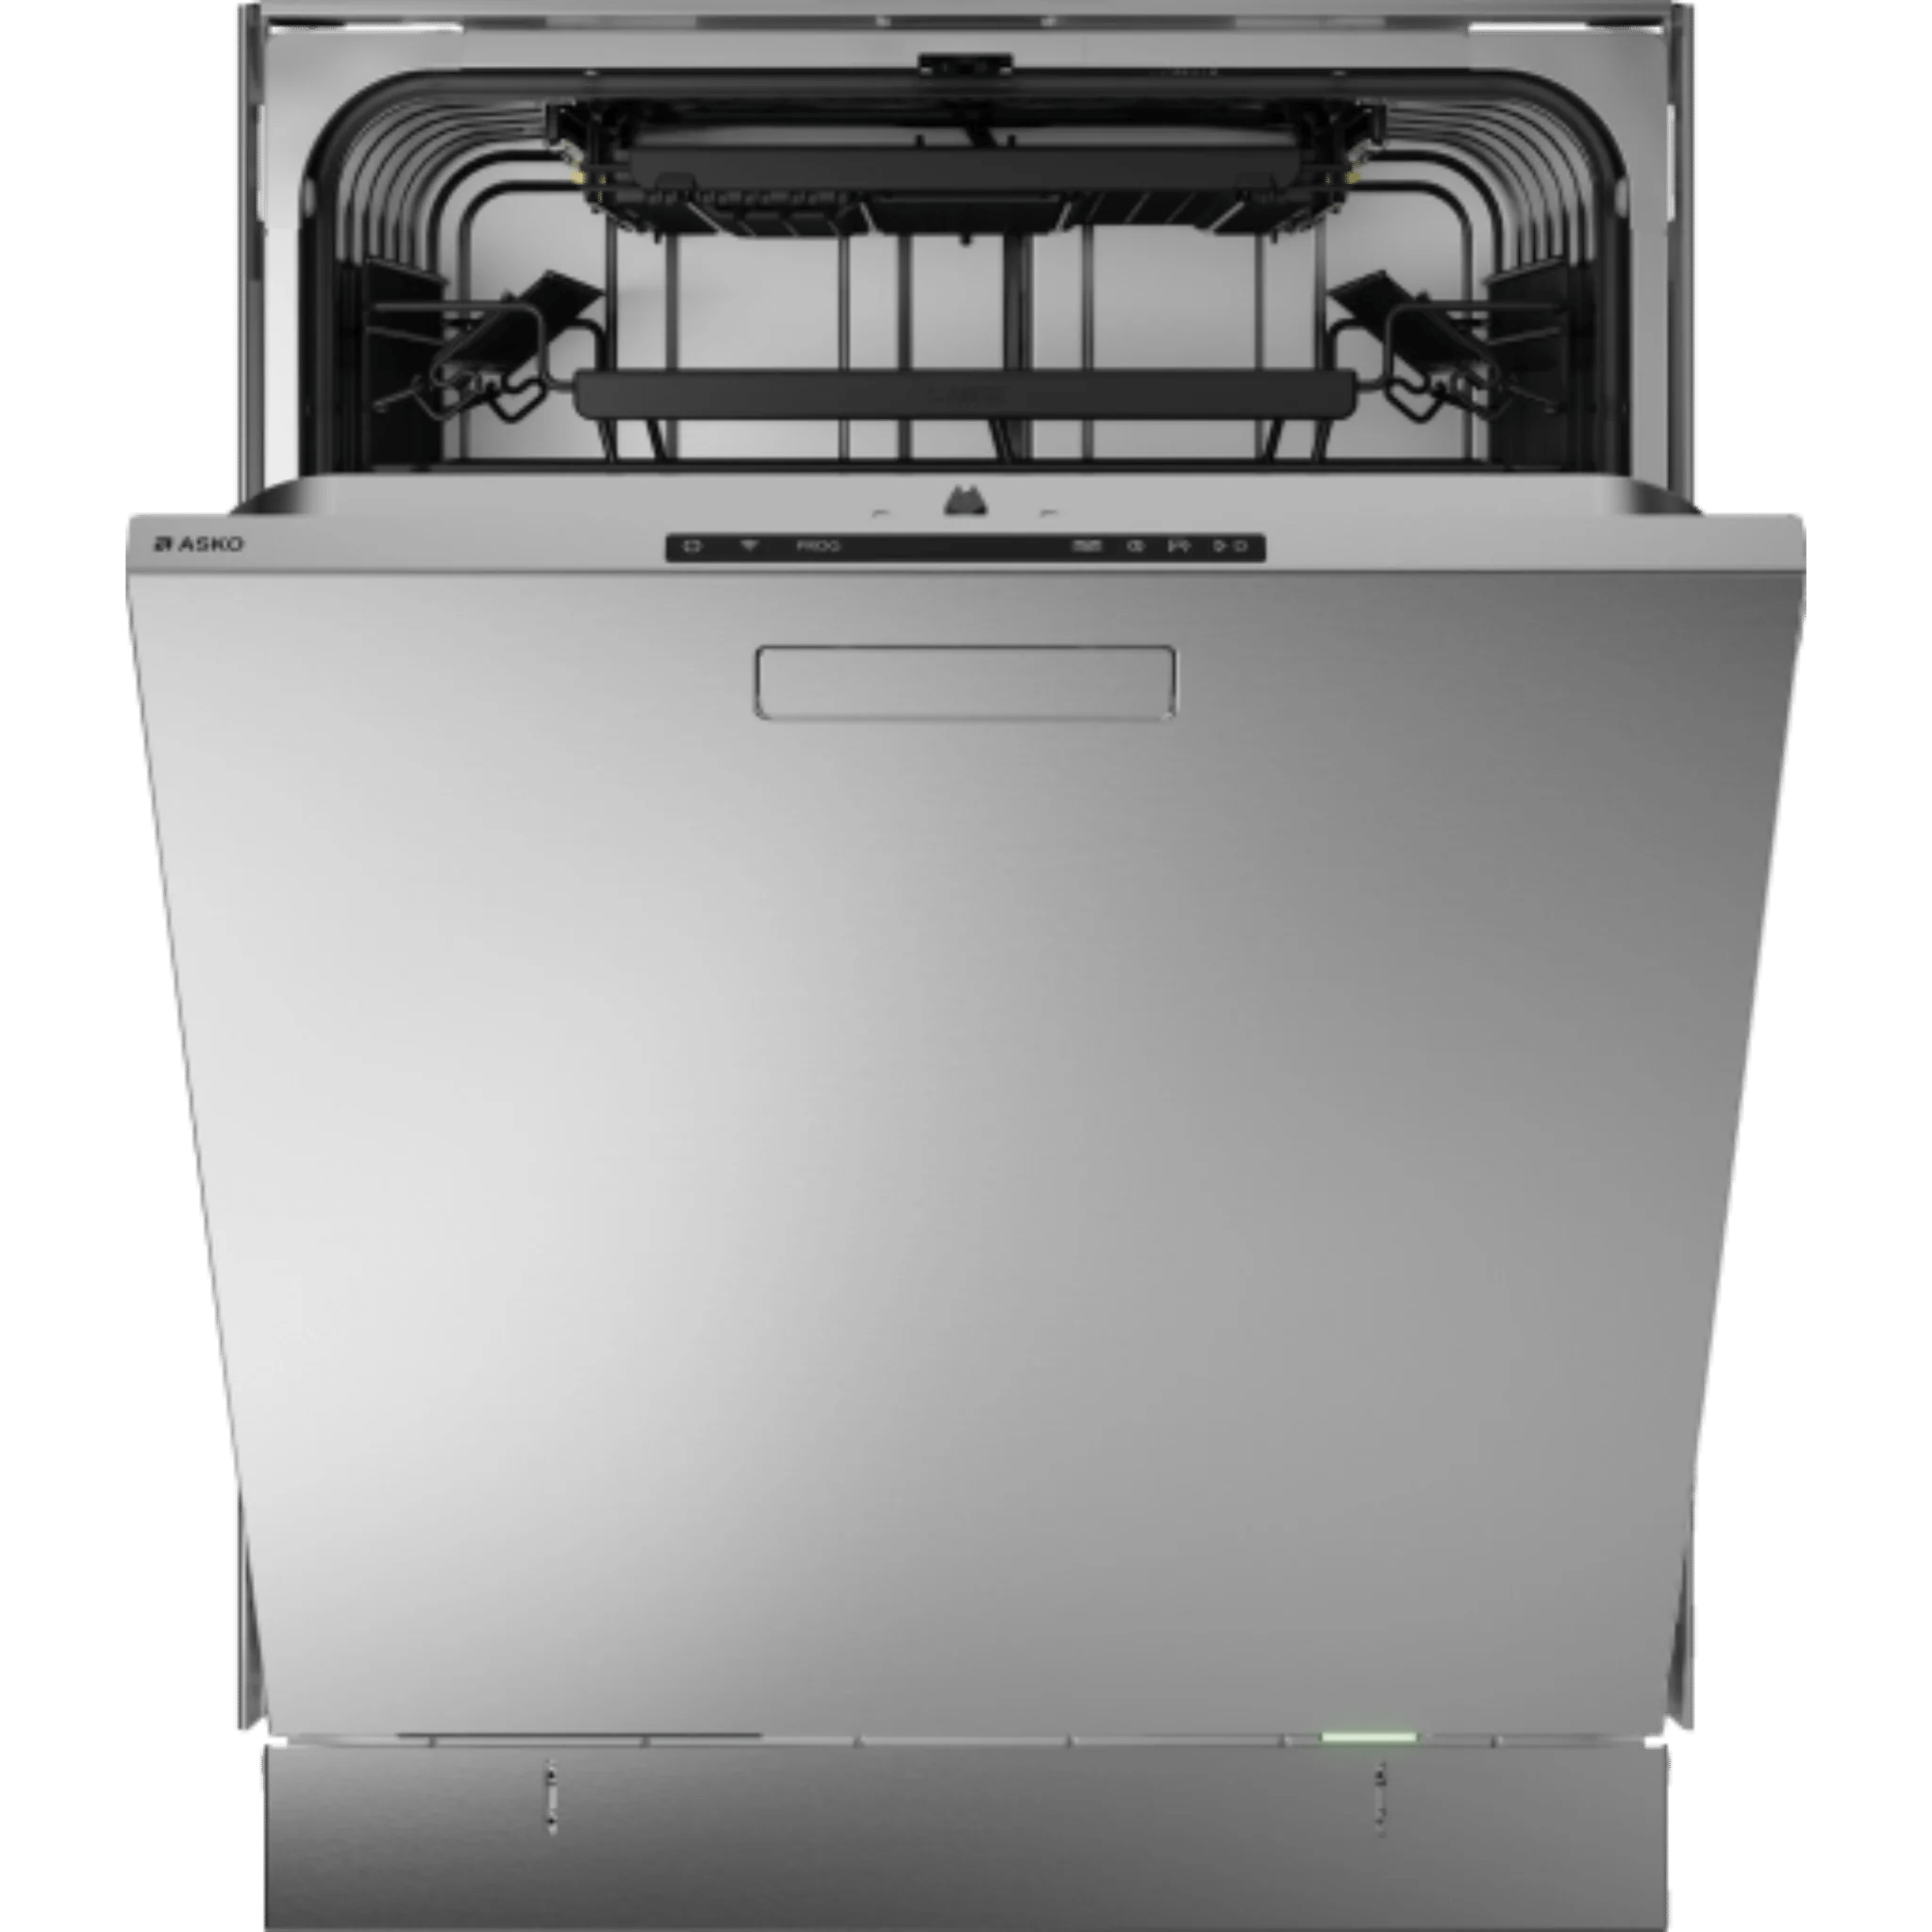 Asko Logic 24 Inch Wide 16 Place Setting Built-In Top Control Dishwasher with Pocket Handle, Water Softener, and Auto Door Open Drying™ Dishwashers DBI564ISSOF Luxury Appliances Direct